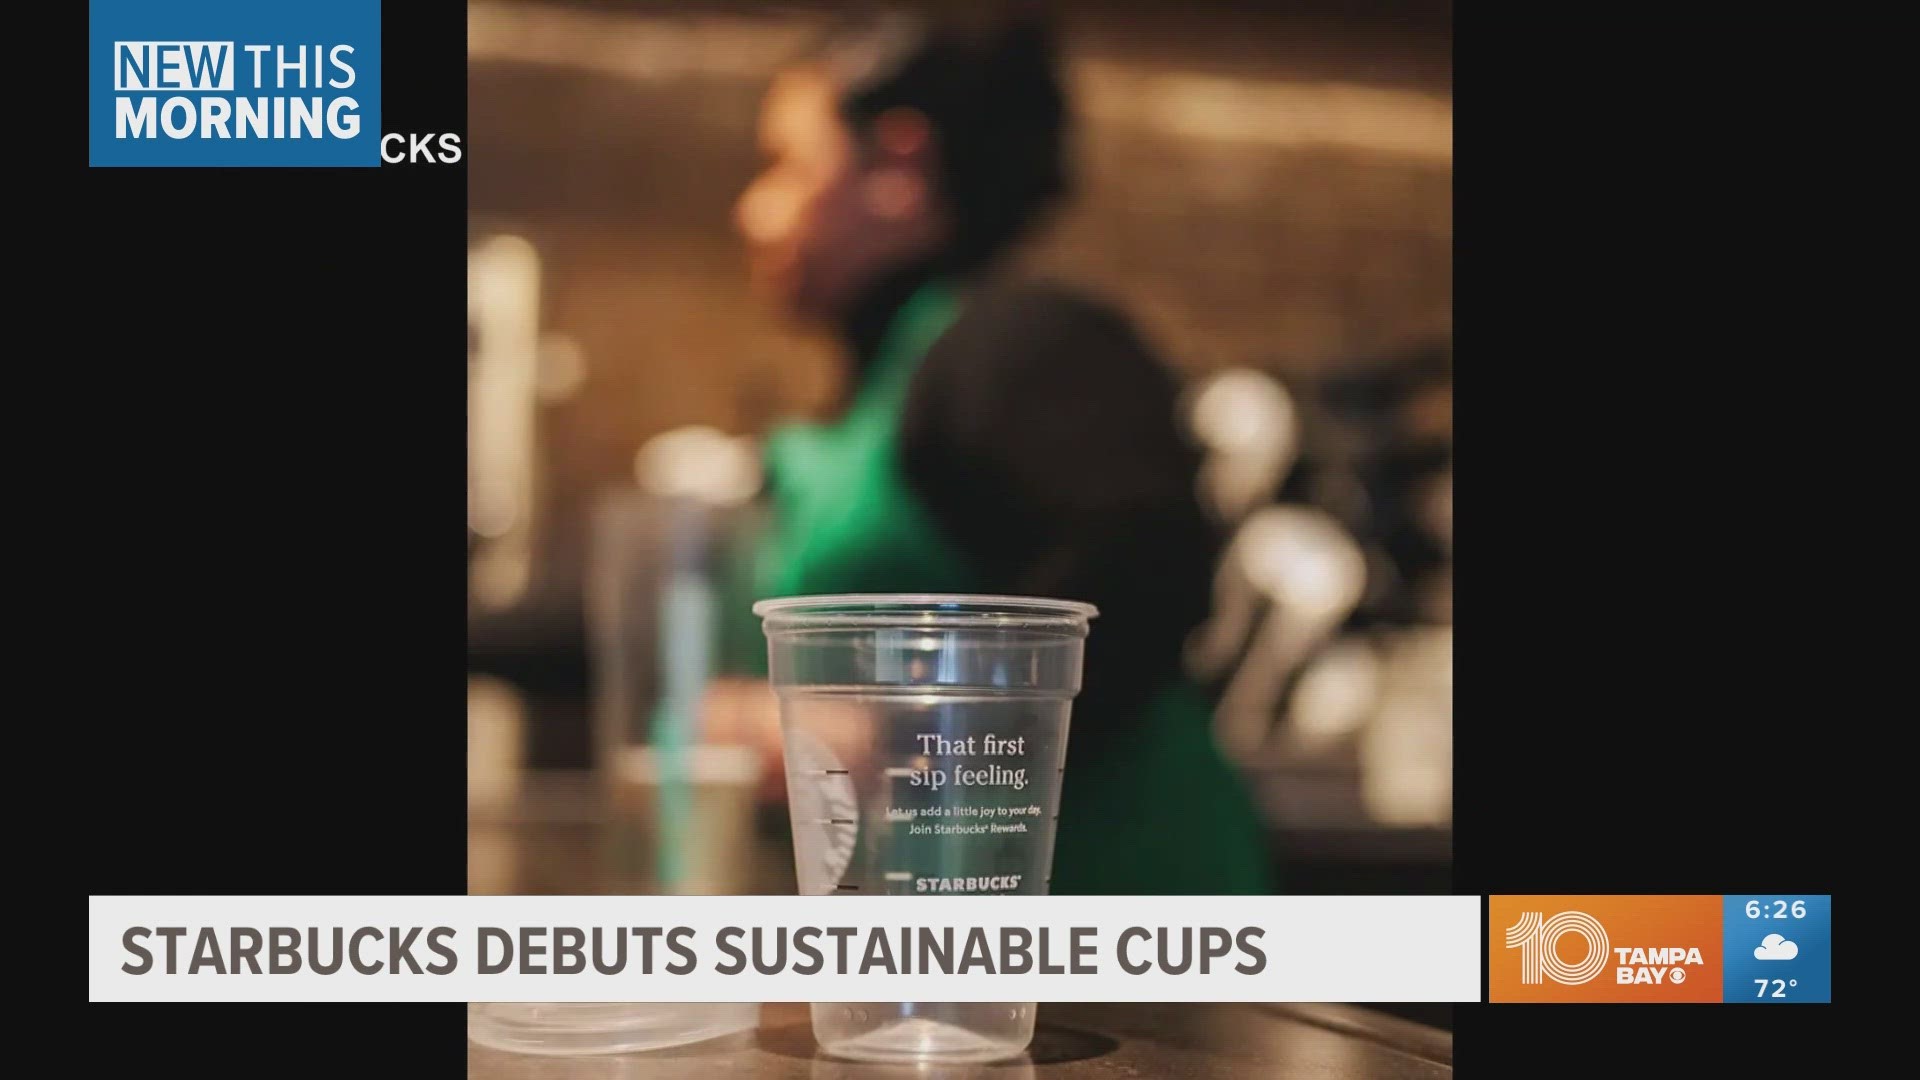 The company is debuting new cold drink cups that contain 20% less plastic than previous ones this month.